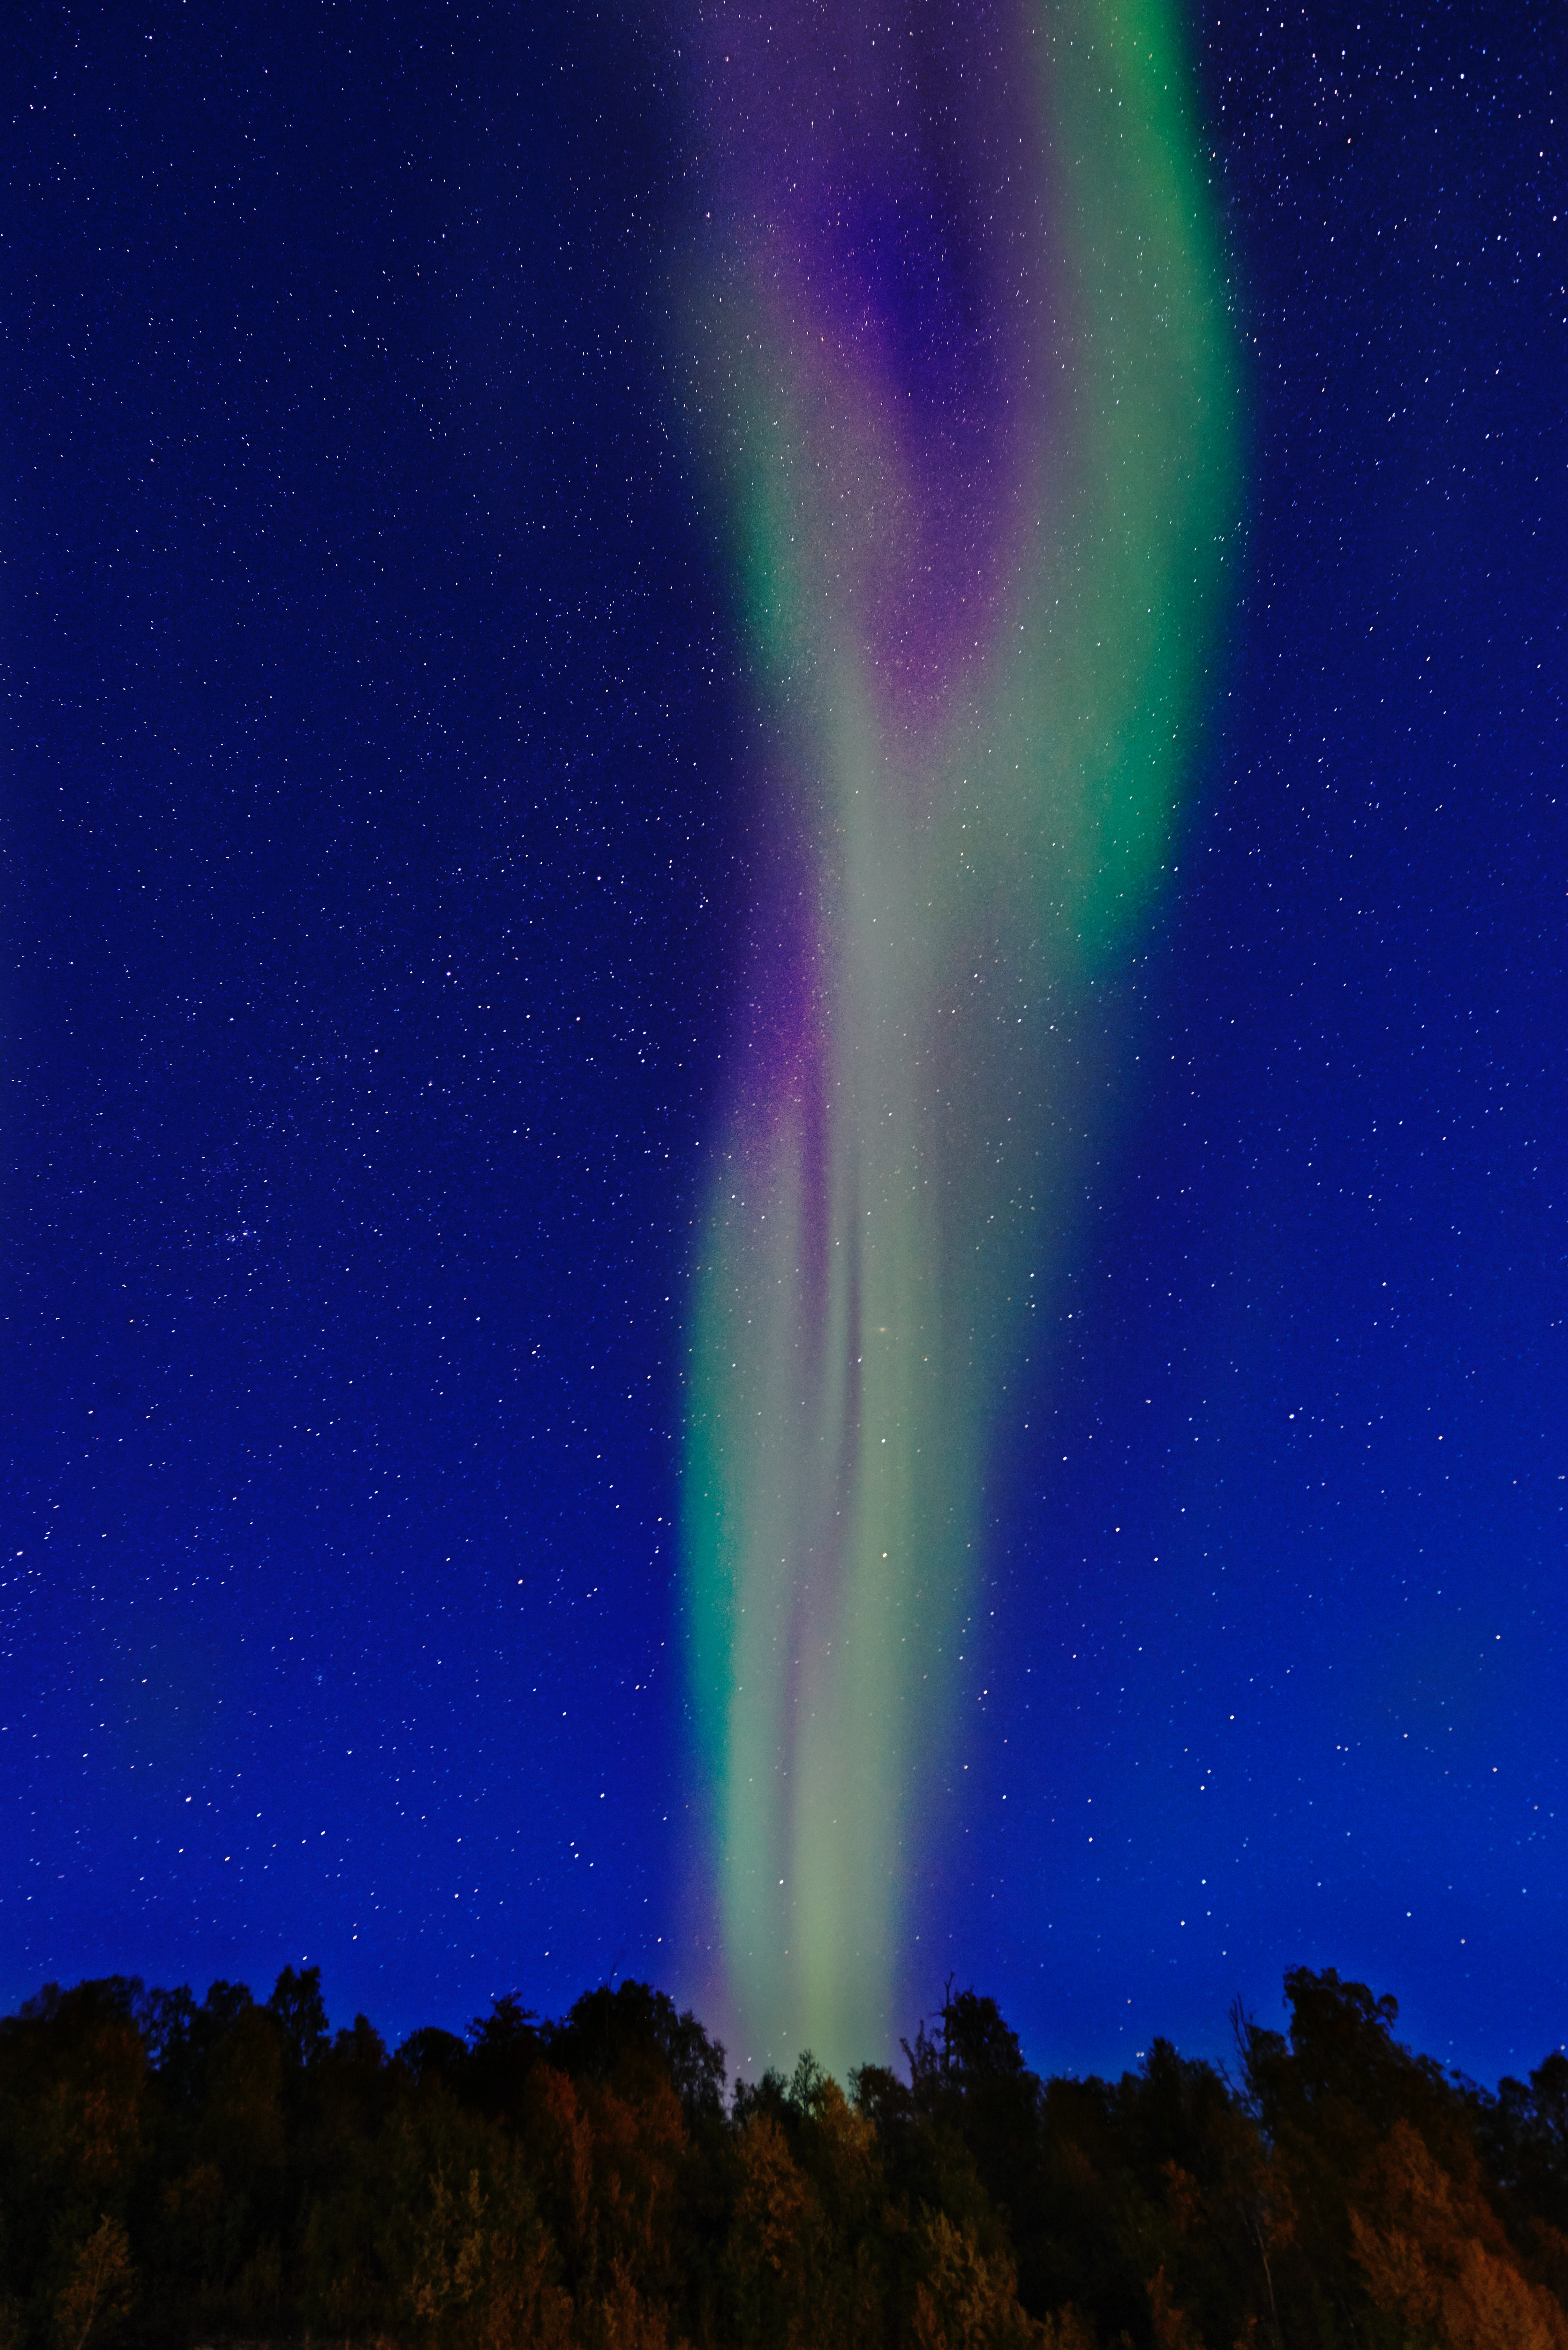 A tall and thin green, red-purple, and blue-ish colored aurora borealis stretching up into the sky from trees.